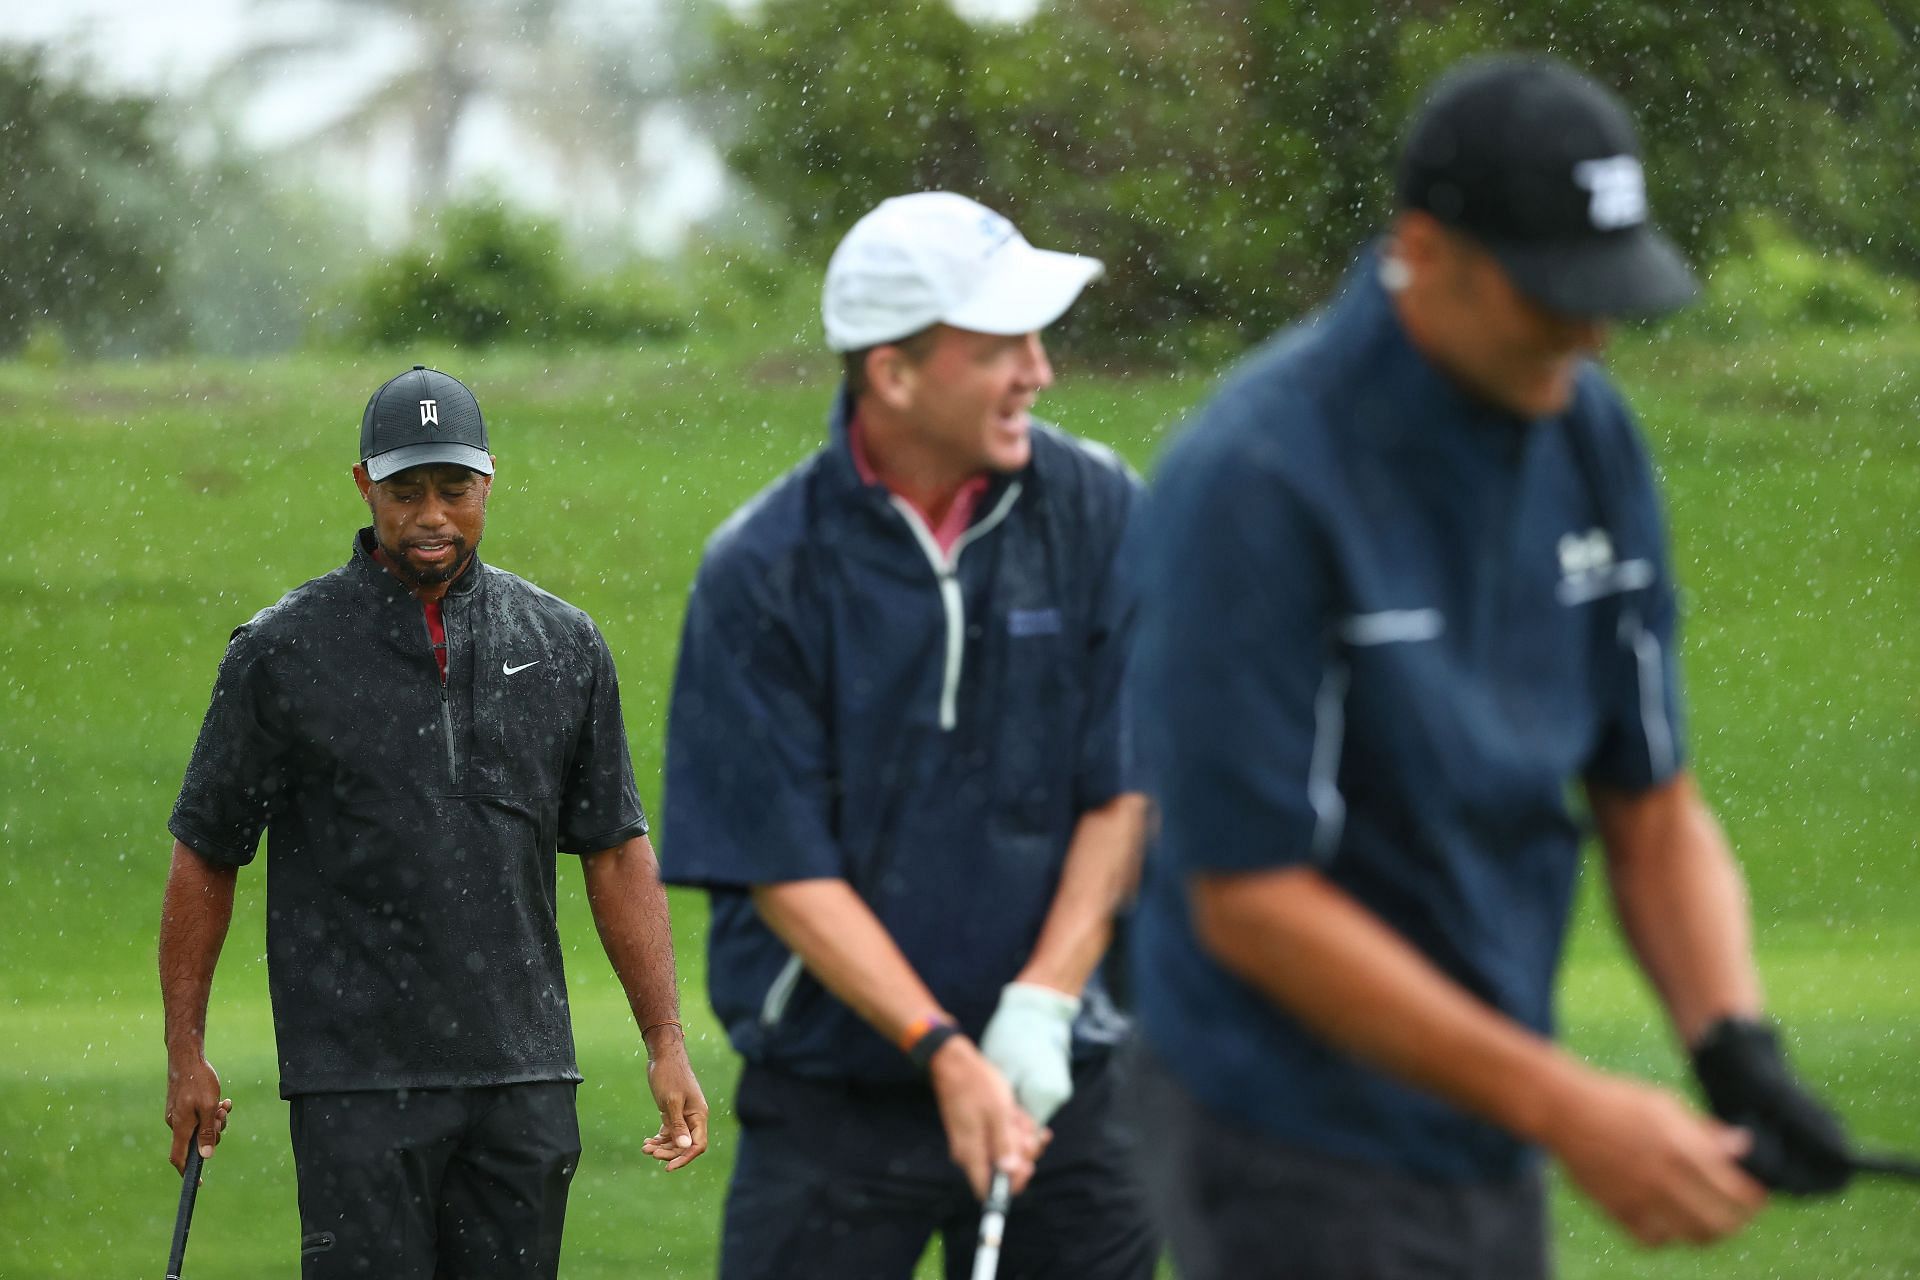 Tiger Woods, Peyton Manning, and Tom Brady tee off for a charity golf event